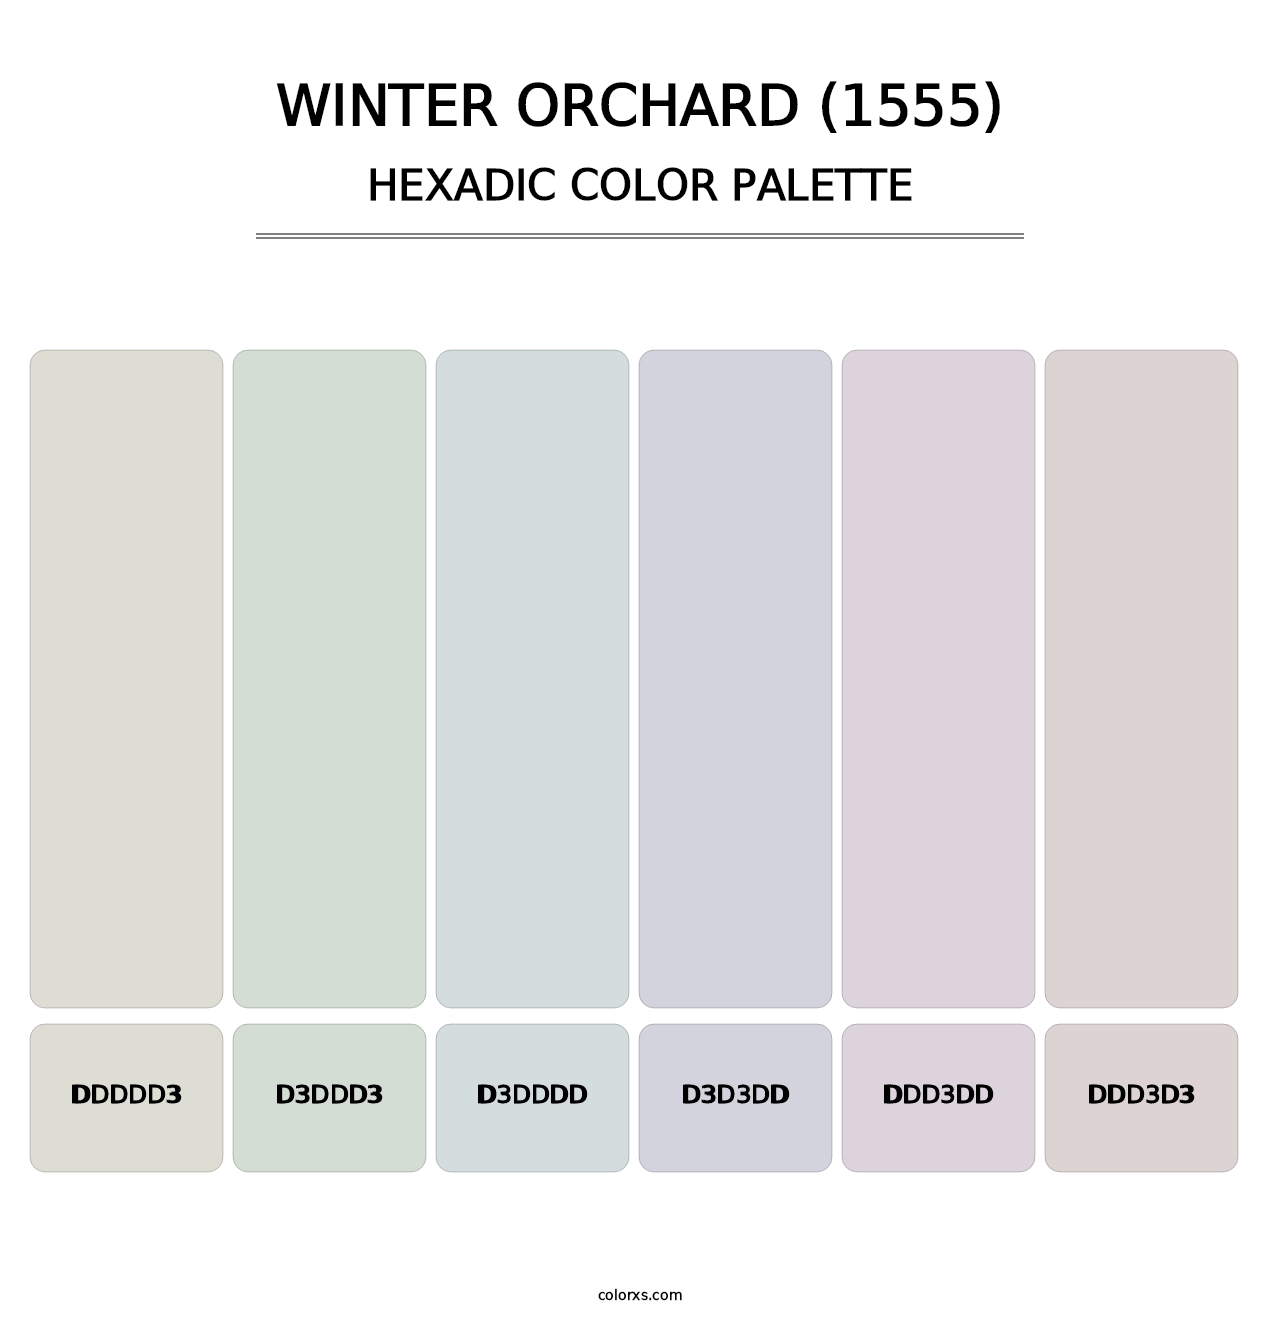 Winter Orchard (1555) - Hexadic Color Palette